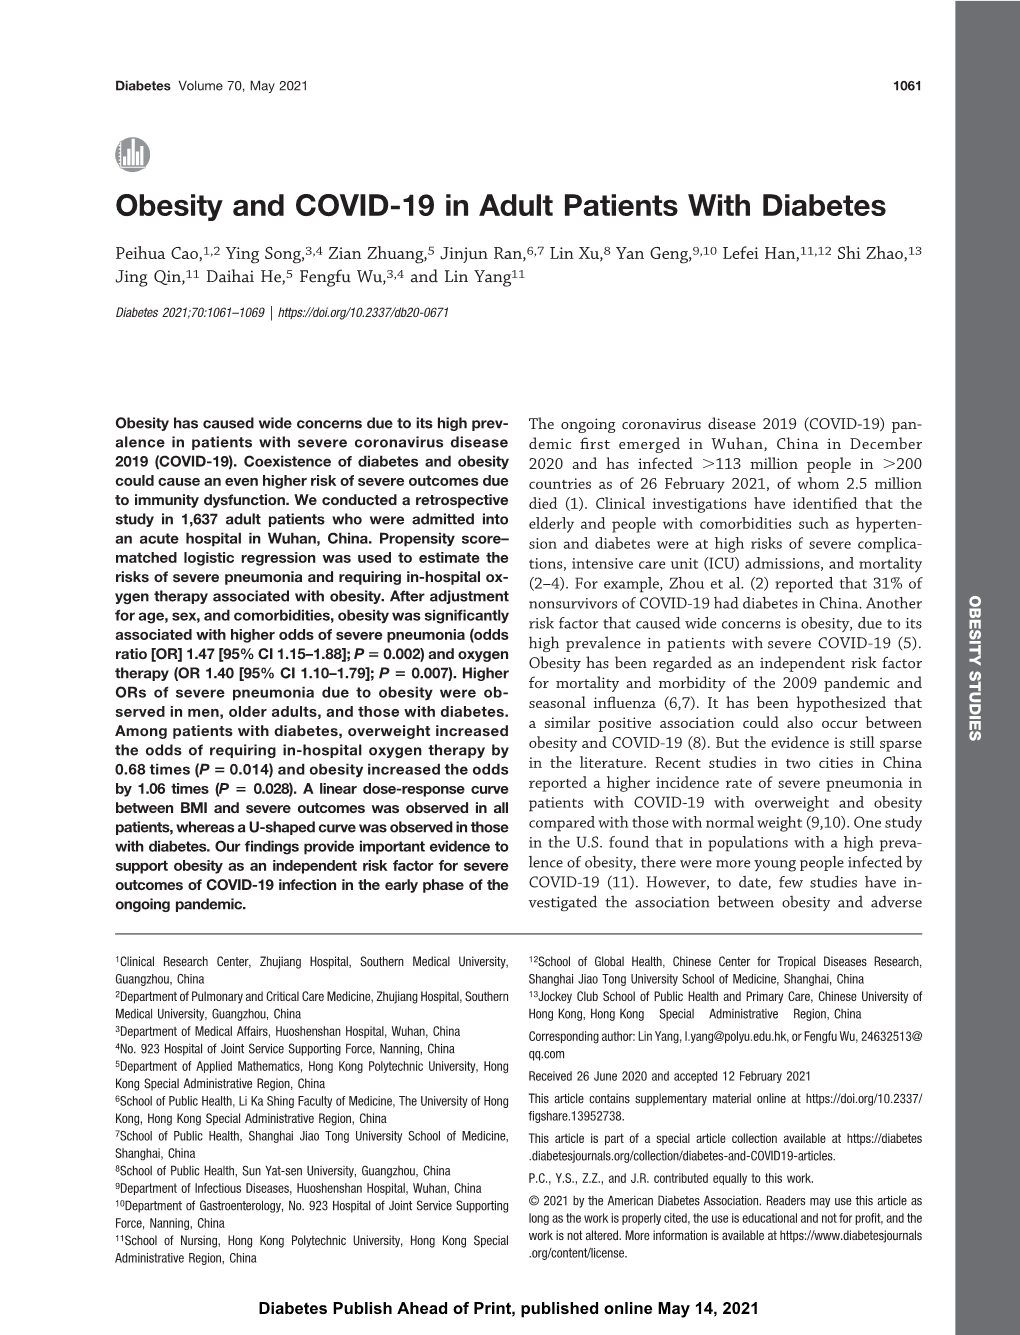 Obesity and COVID-19 in Adult Patients with Diabetes